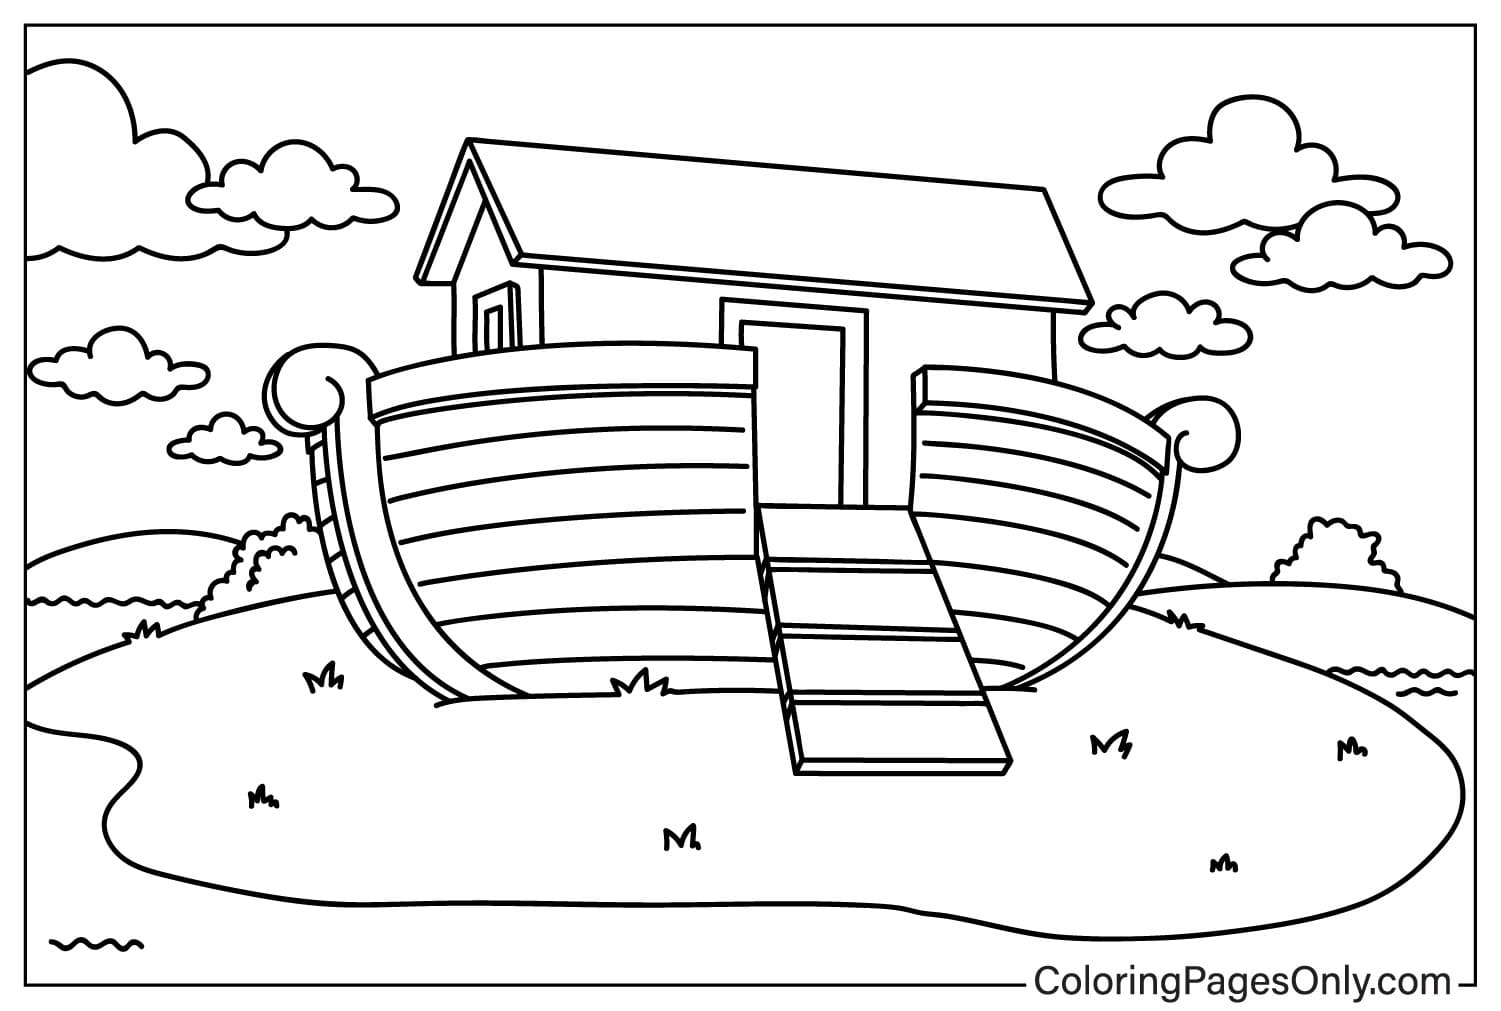 Noah’s Ark Coloring Page for Kids from Noah’s Ark